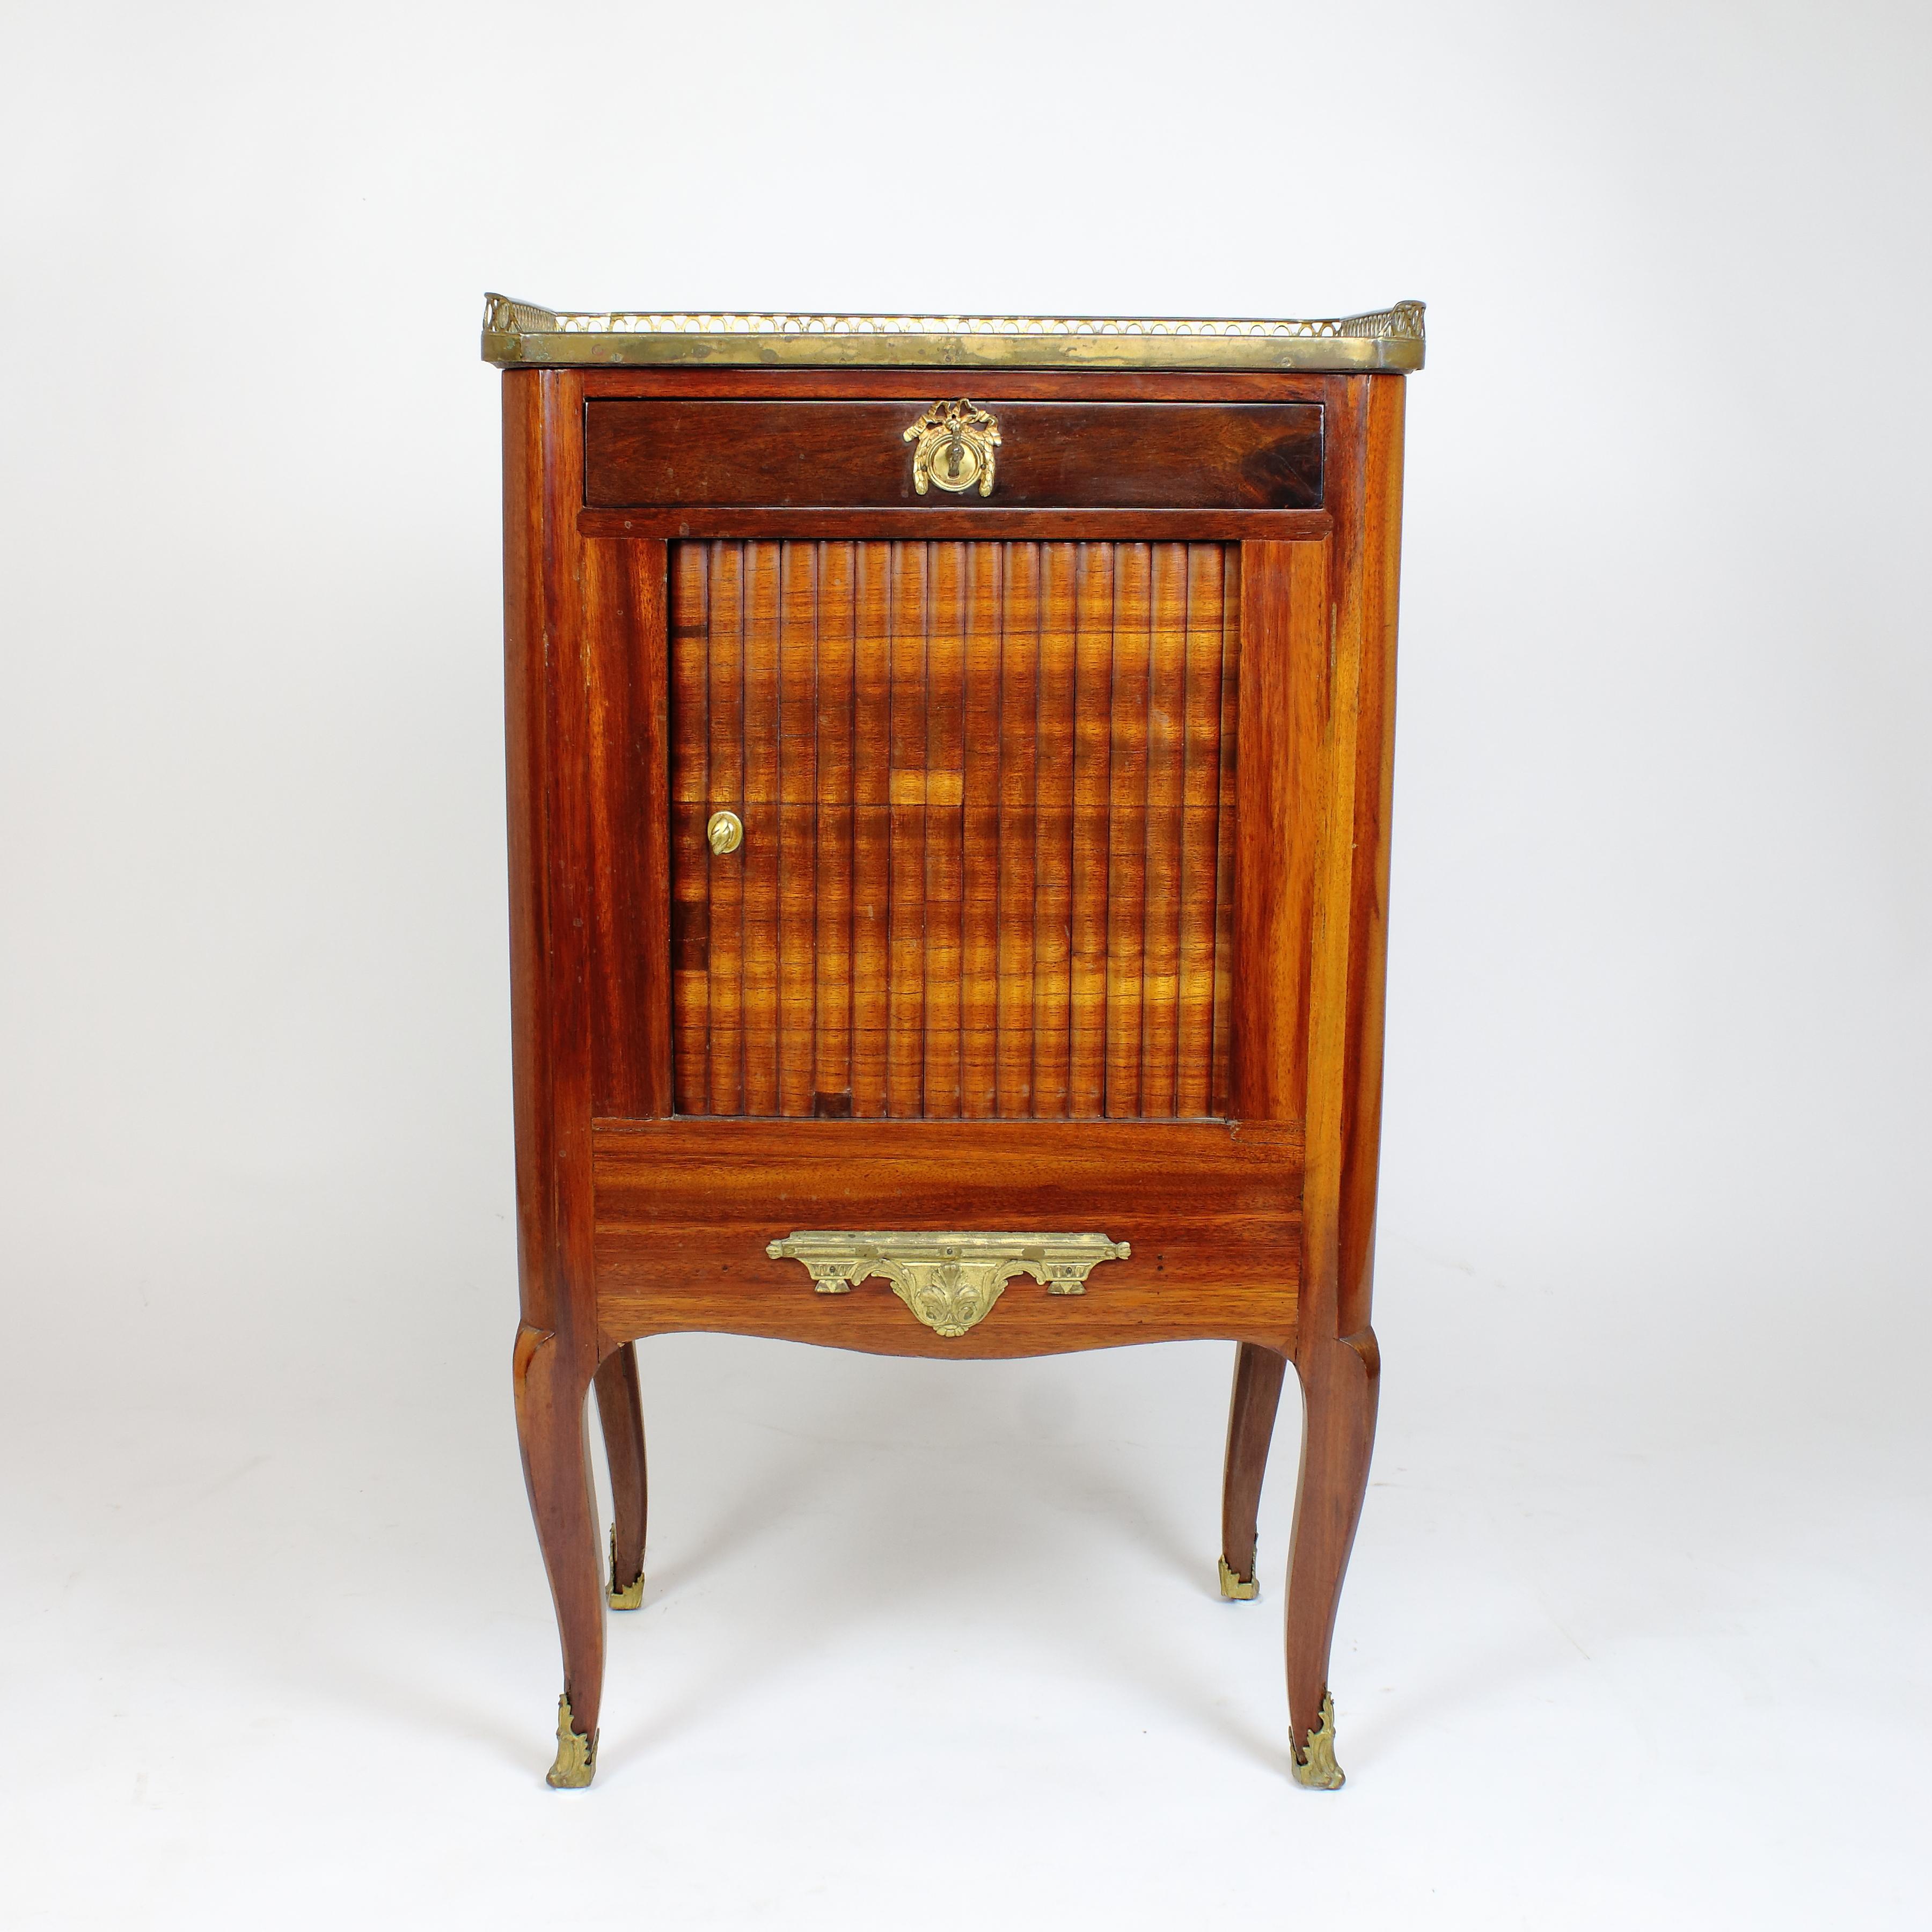 18th century French transition Louis XVI small writing cabinet Meuble Ecritoire

Rectangular cabinet with canted corners standing on four high cabriole legs with gilt bronze sabots; a sliding door underneath a frieze drawer revealing a removable